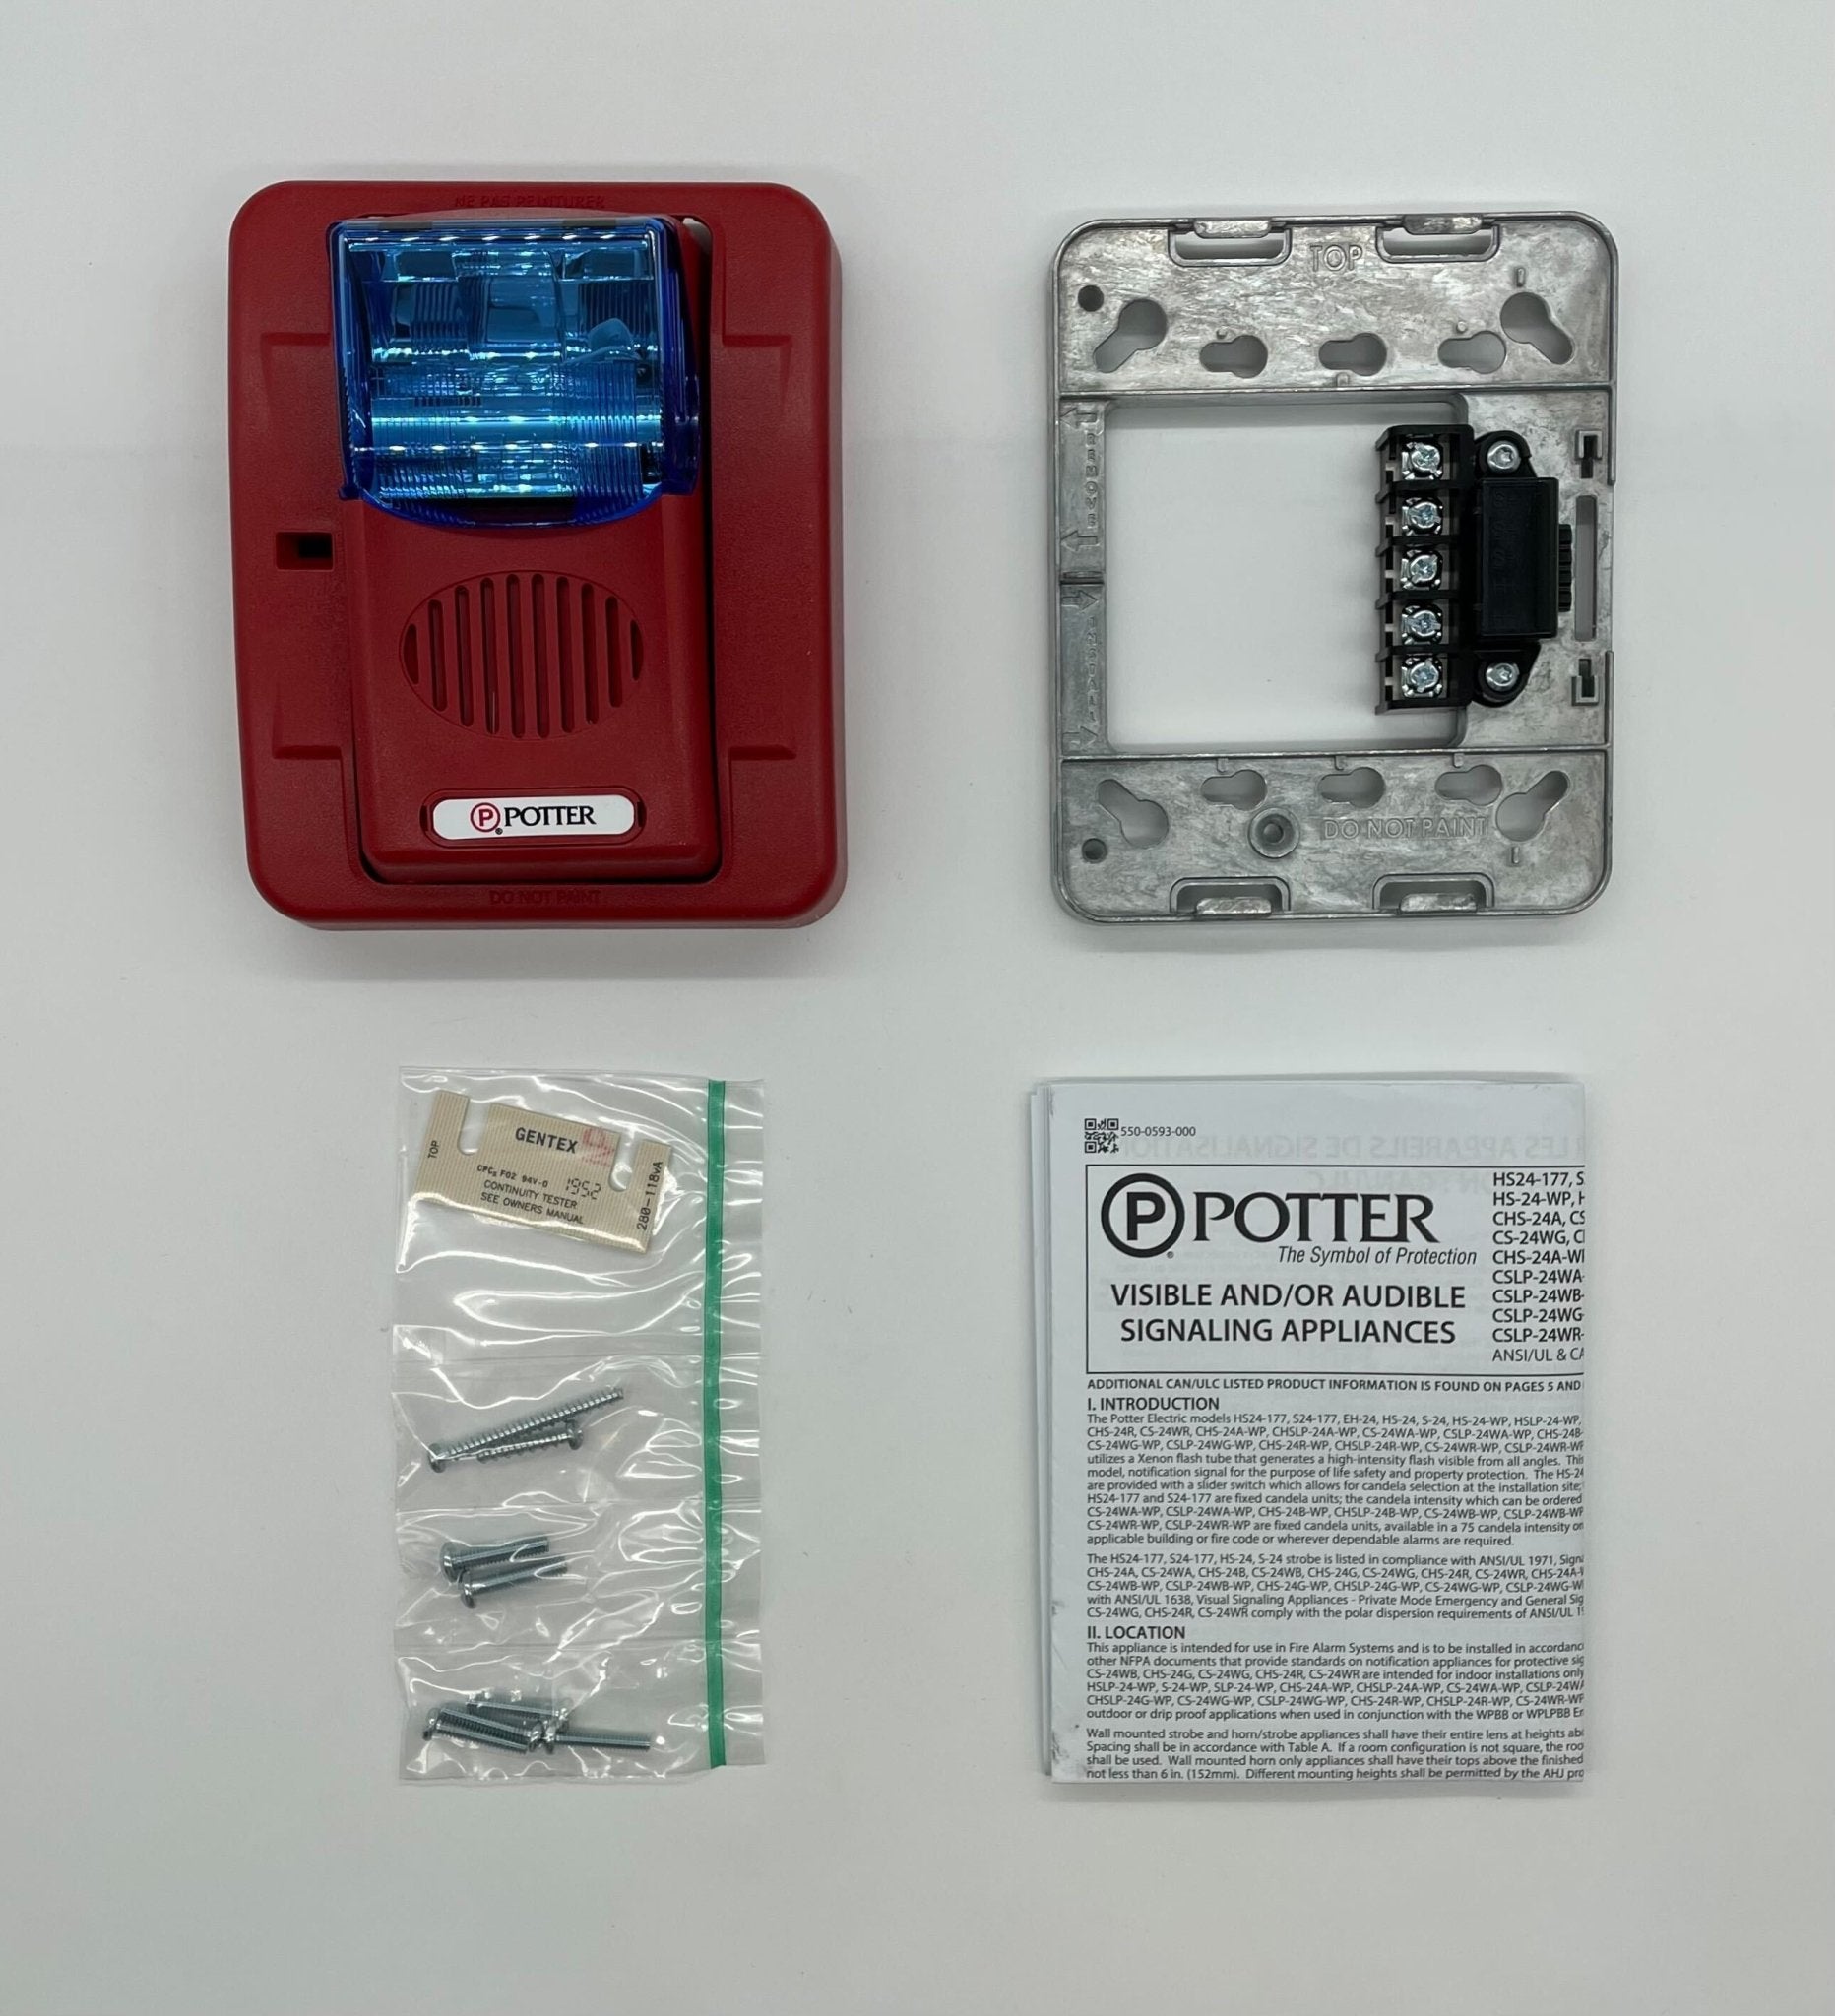 Potter CHS-24BR - The Fire Alarm Supplier